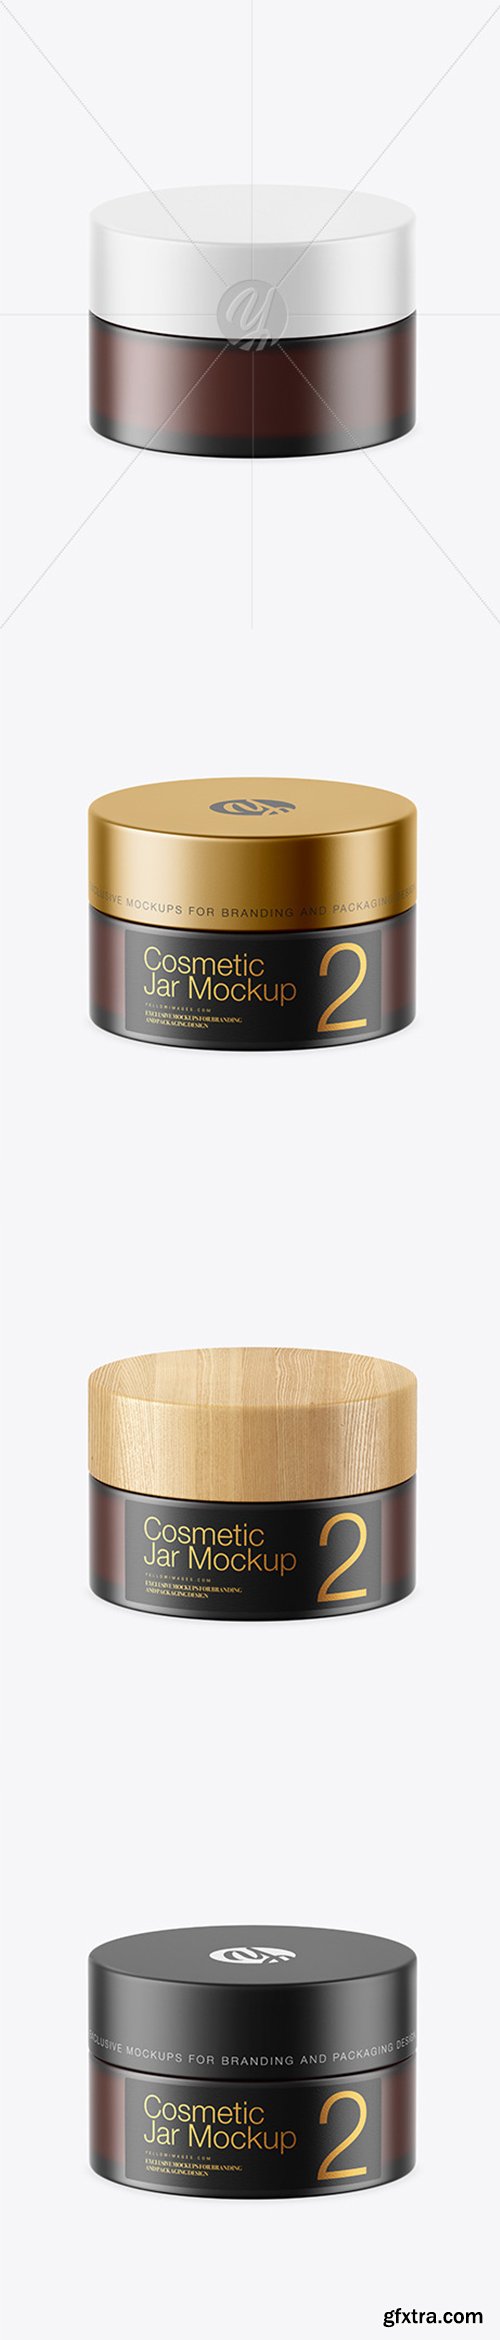 Dark Frosted Amber Glass Cosmetic Jar Mockup 45157